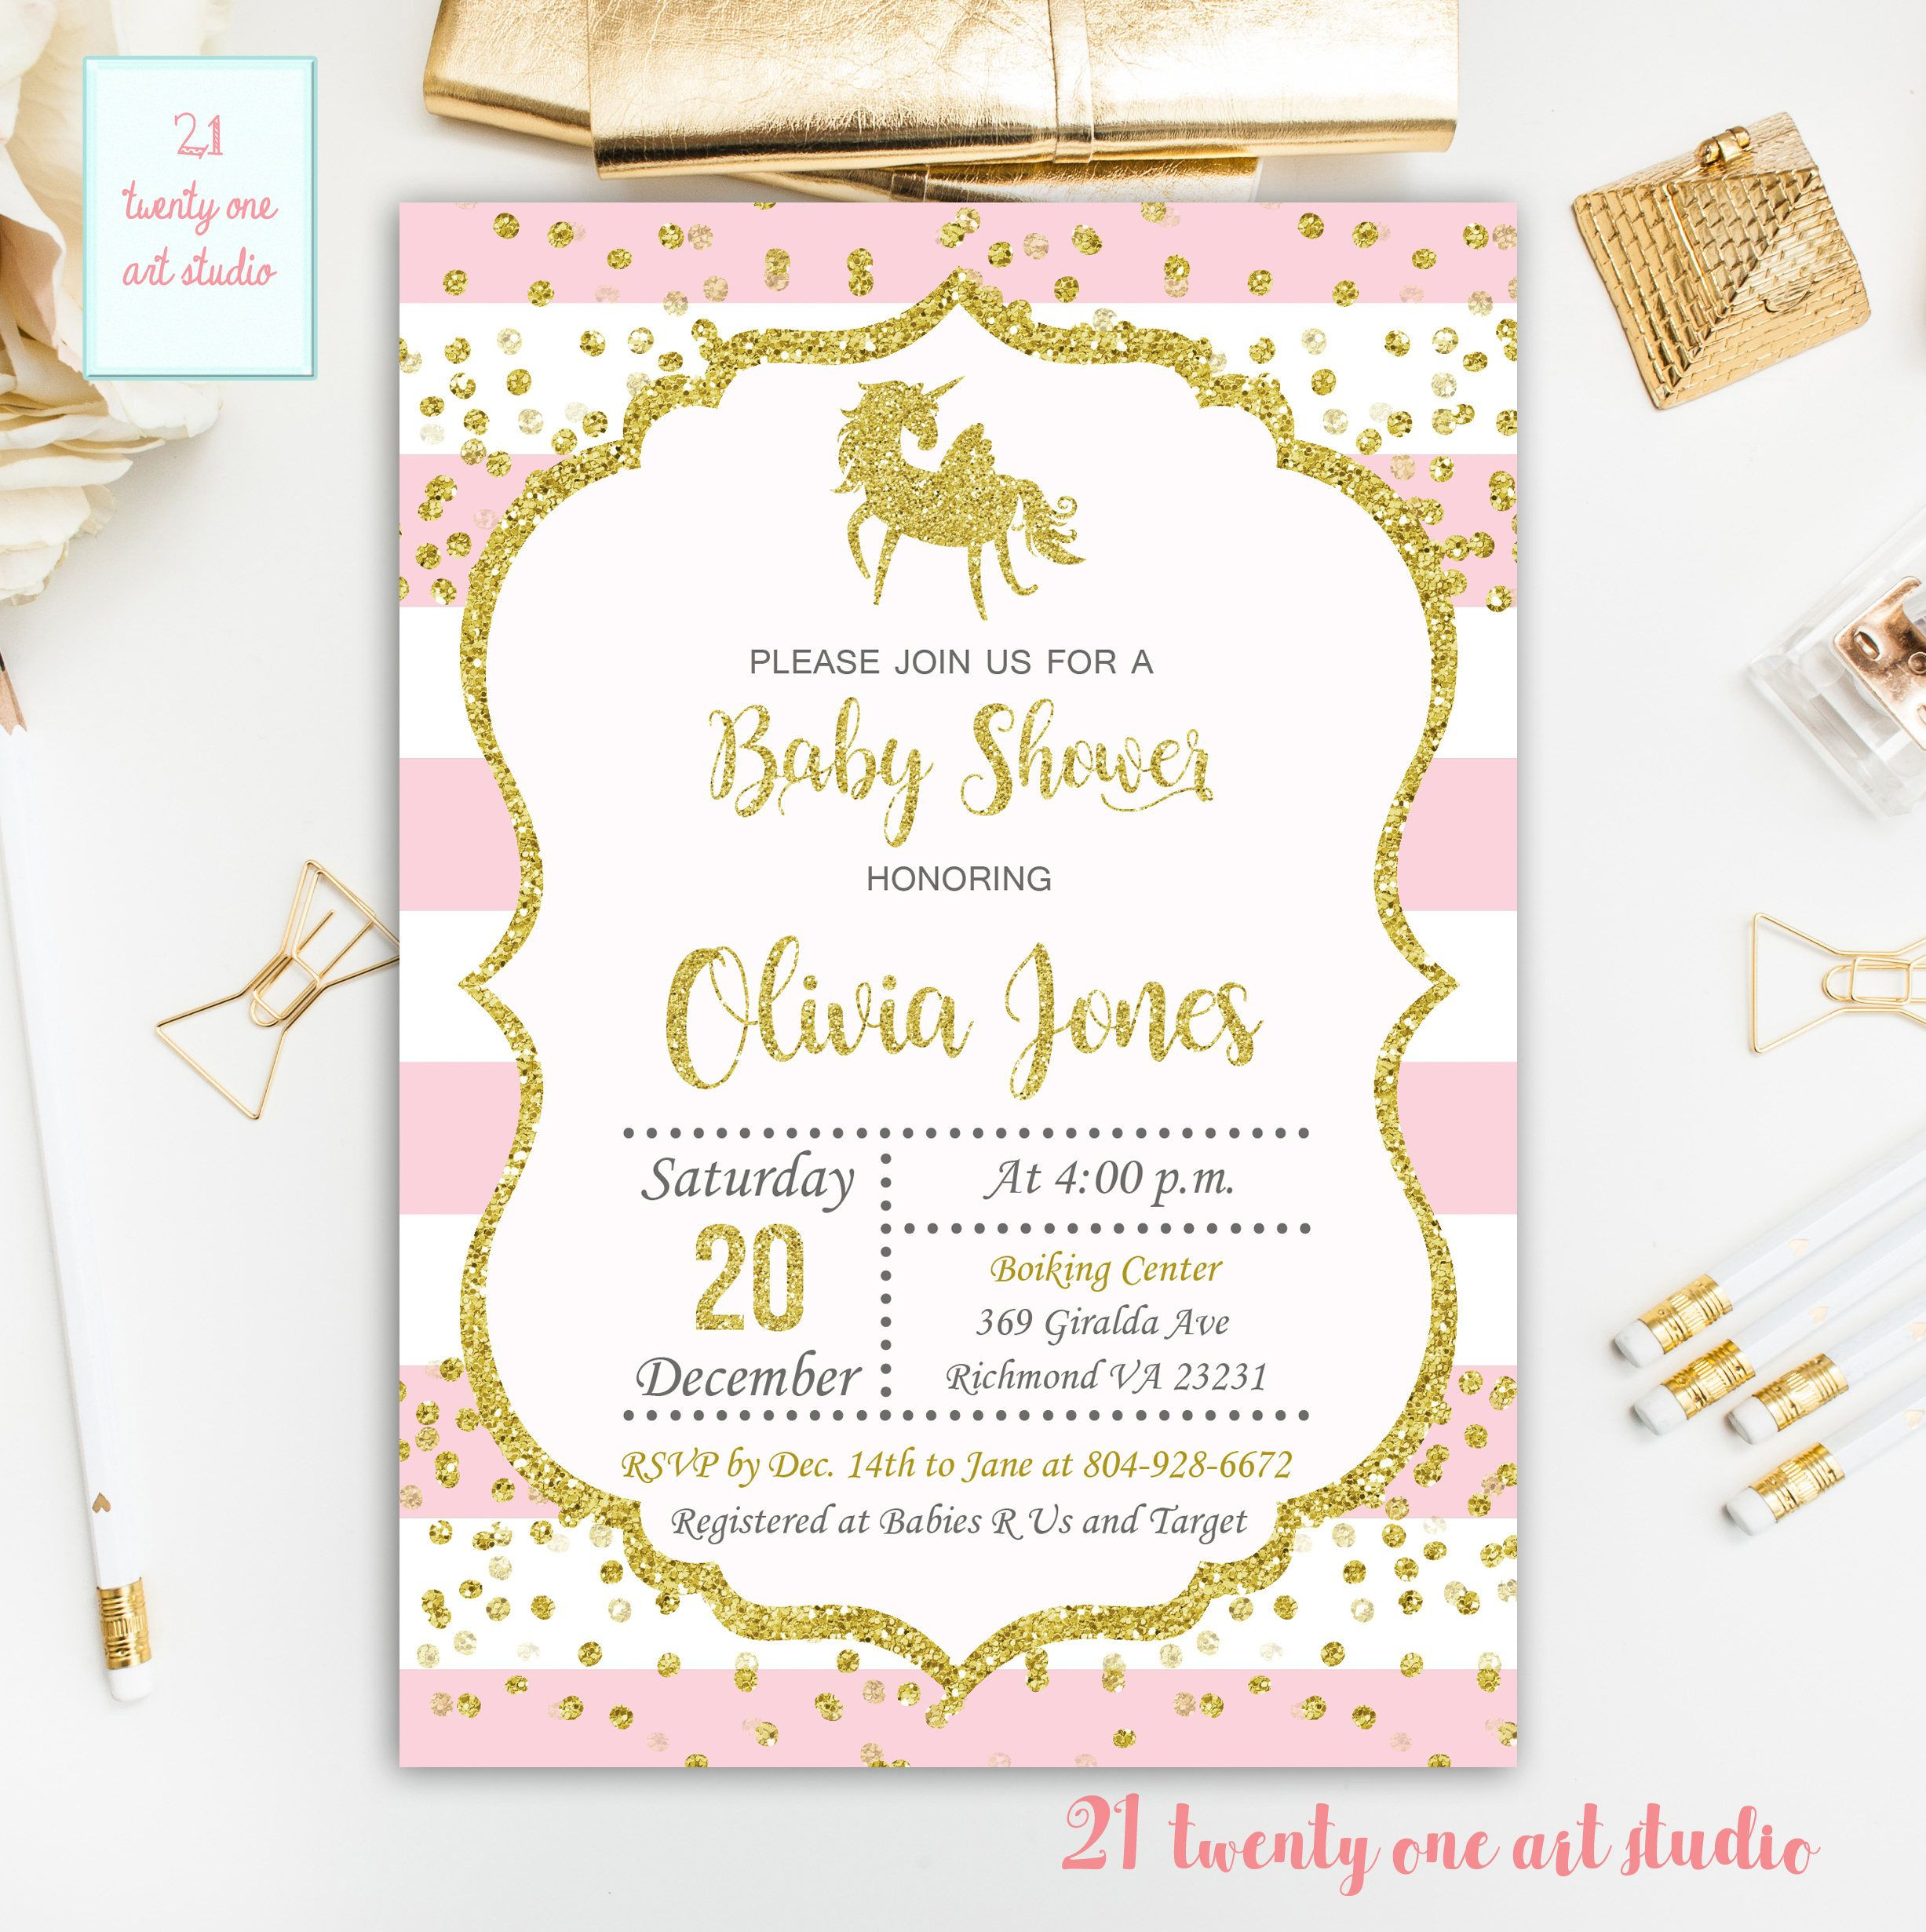 Unicorn Baby Shower Blank Zazzle Download Invitation Cards Of Zazzle Business Card Template